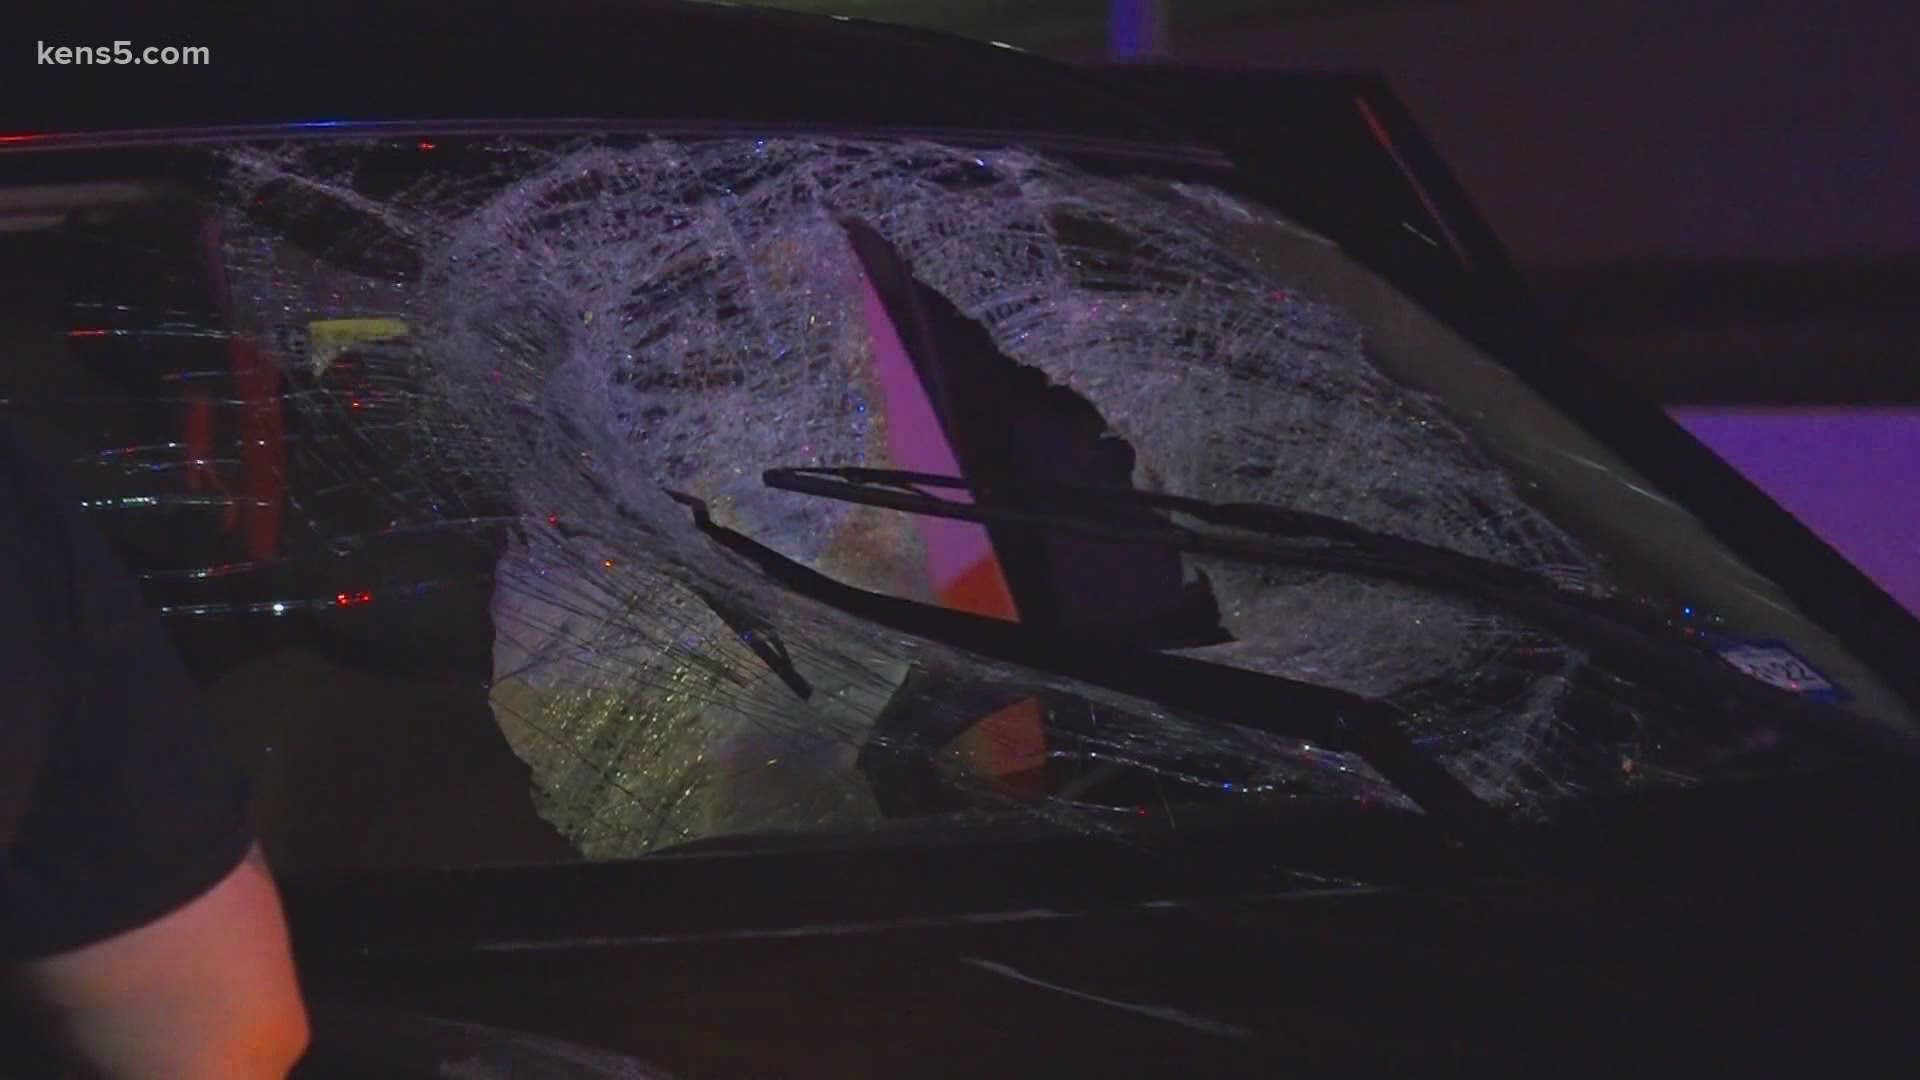 The victim was driving when someone tossed a cinderblock off of the New Braunfels bridge. The cinderblock fell through the woman's window, breaking her arm.